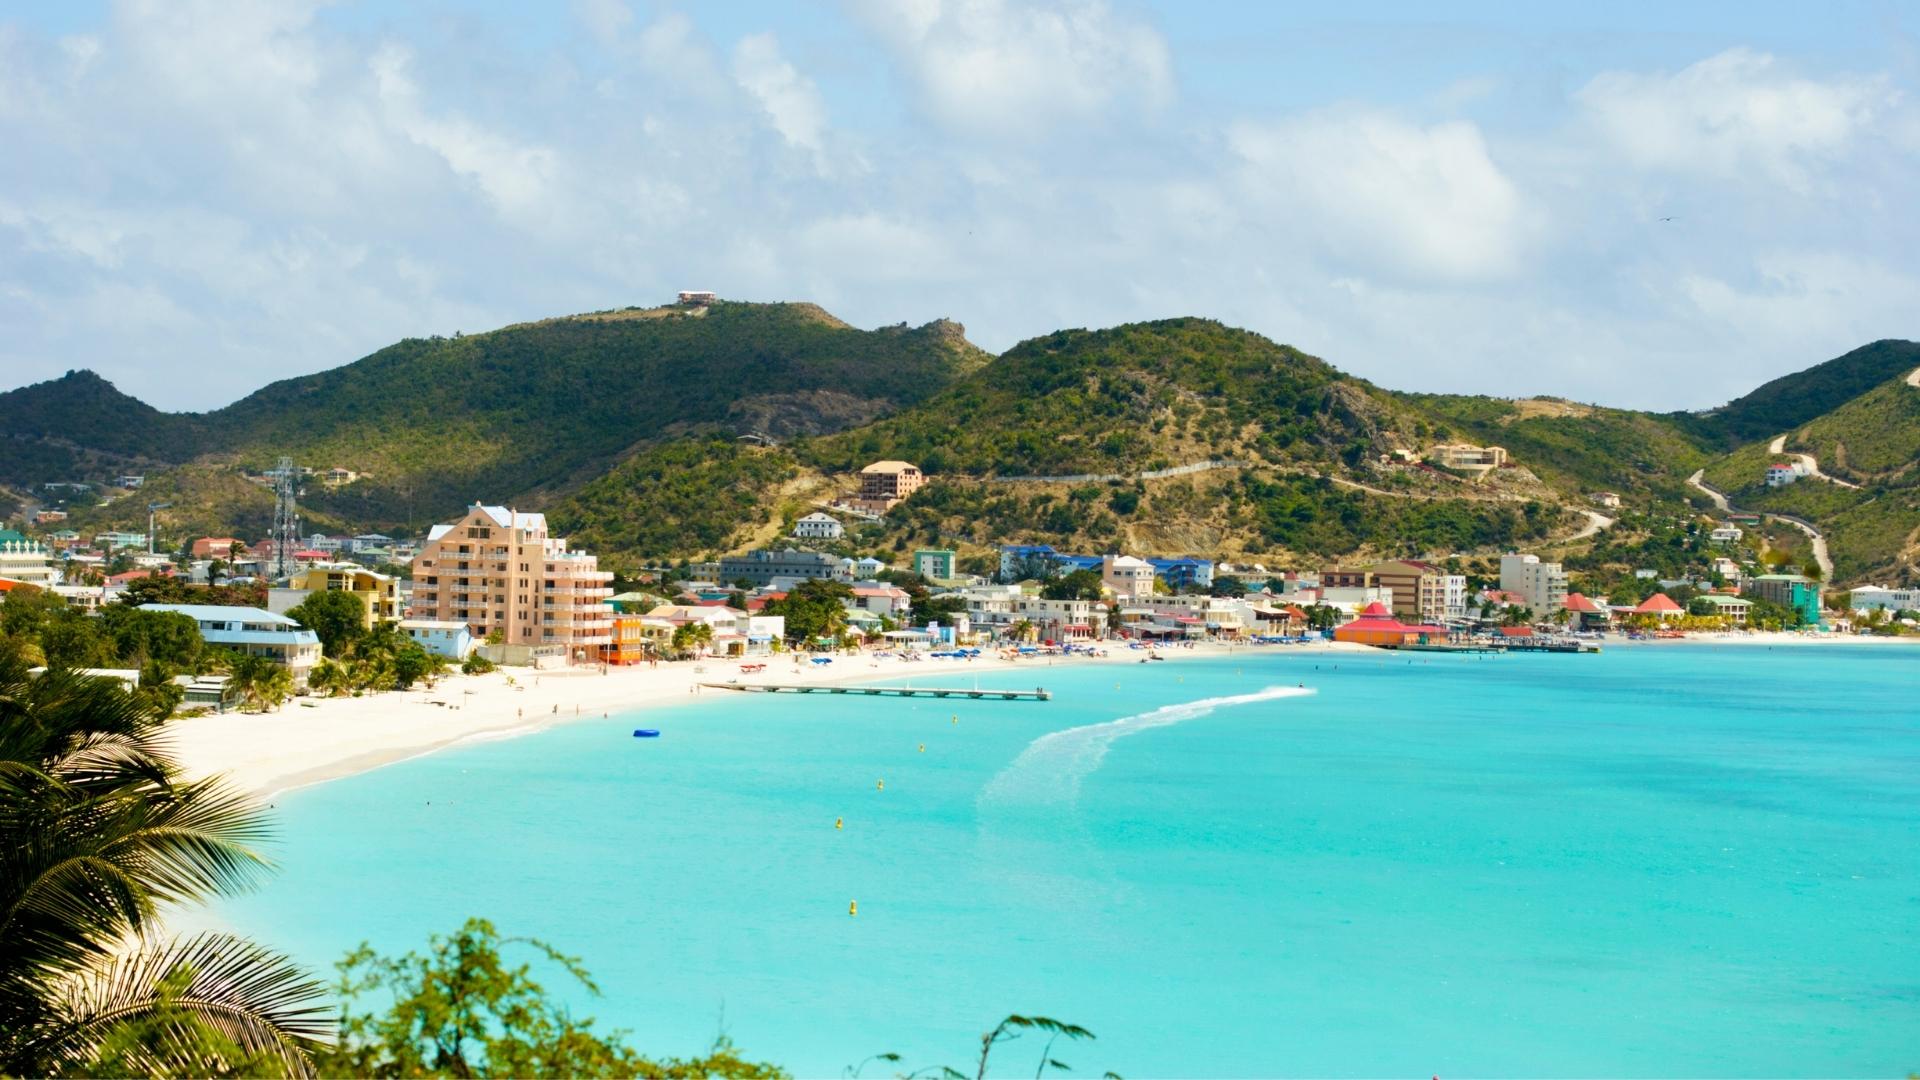 St Maarten - Charter a luxury yacht in St Martin or St Barth